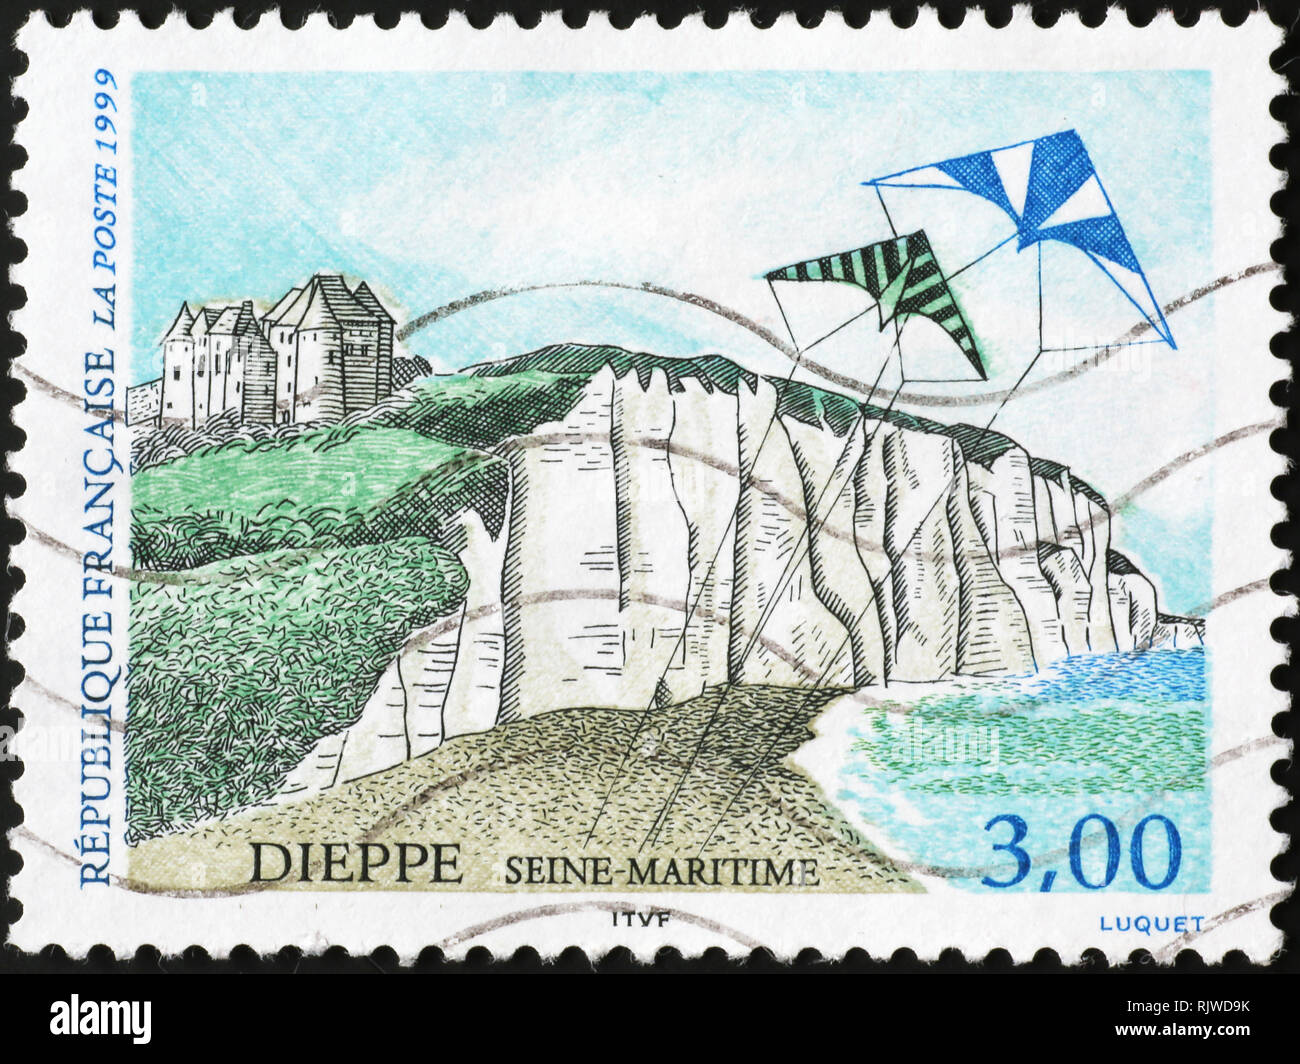 Cliffs of Dieppe on french postage stamp Stock Photo